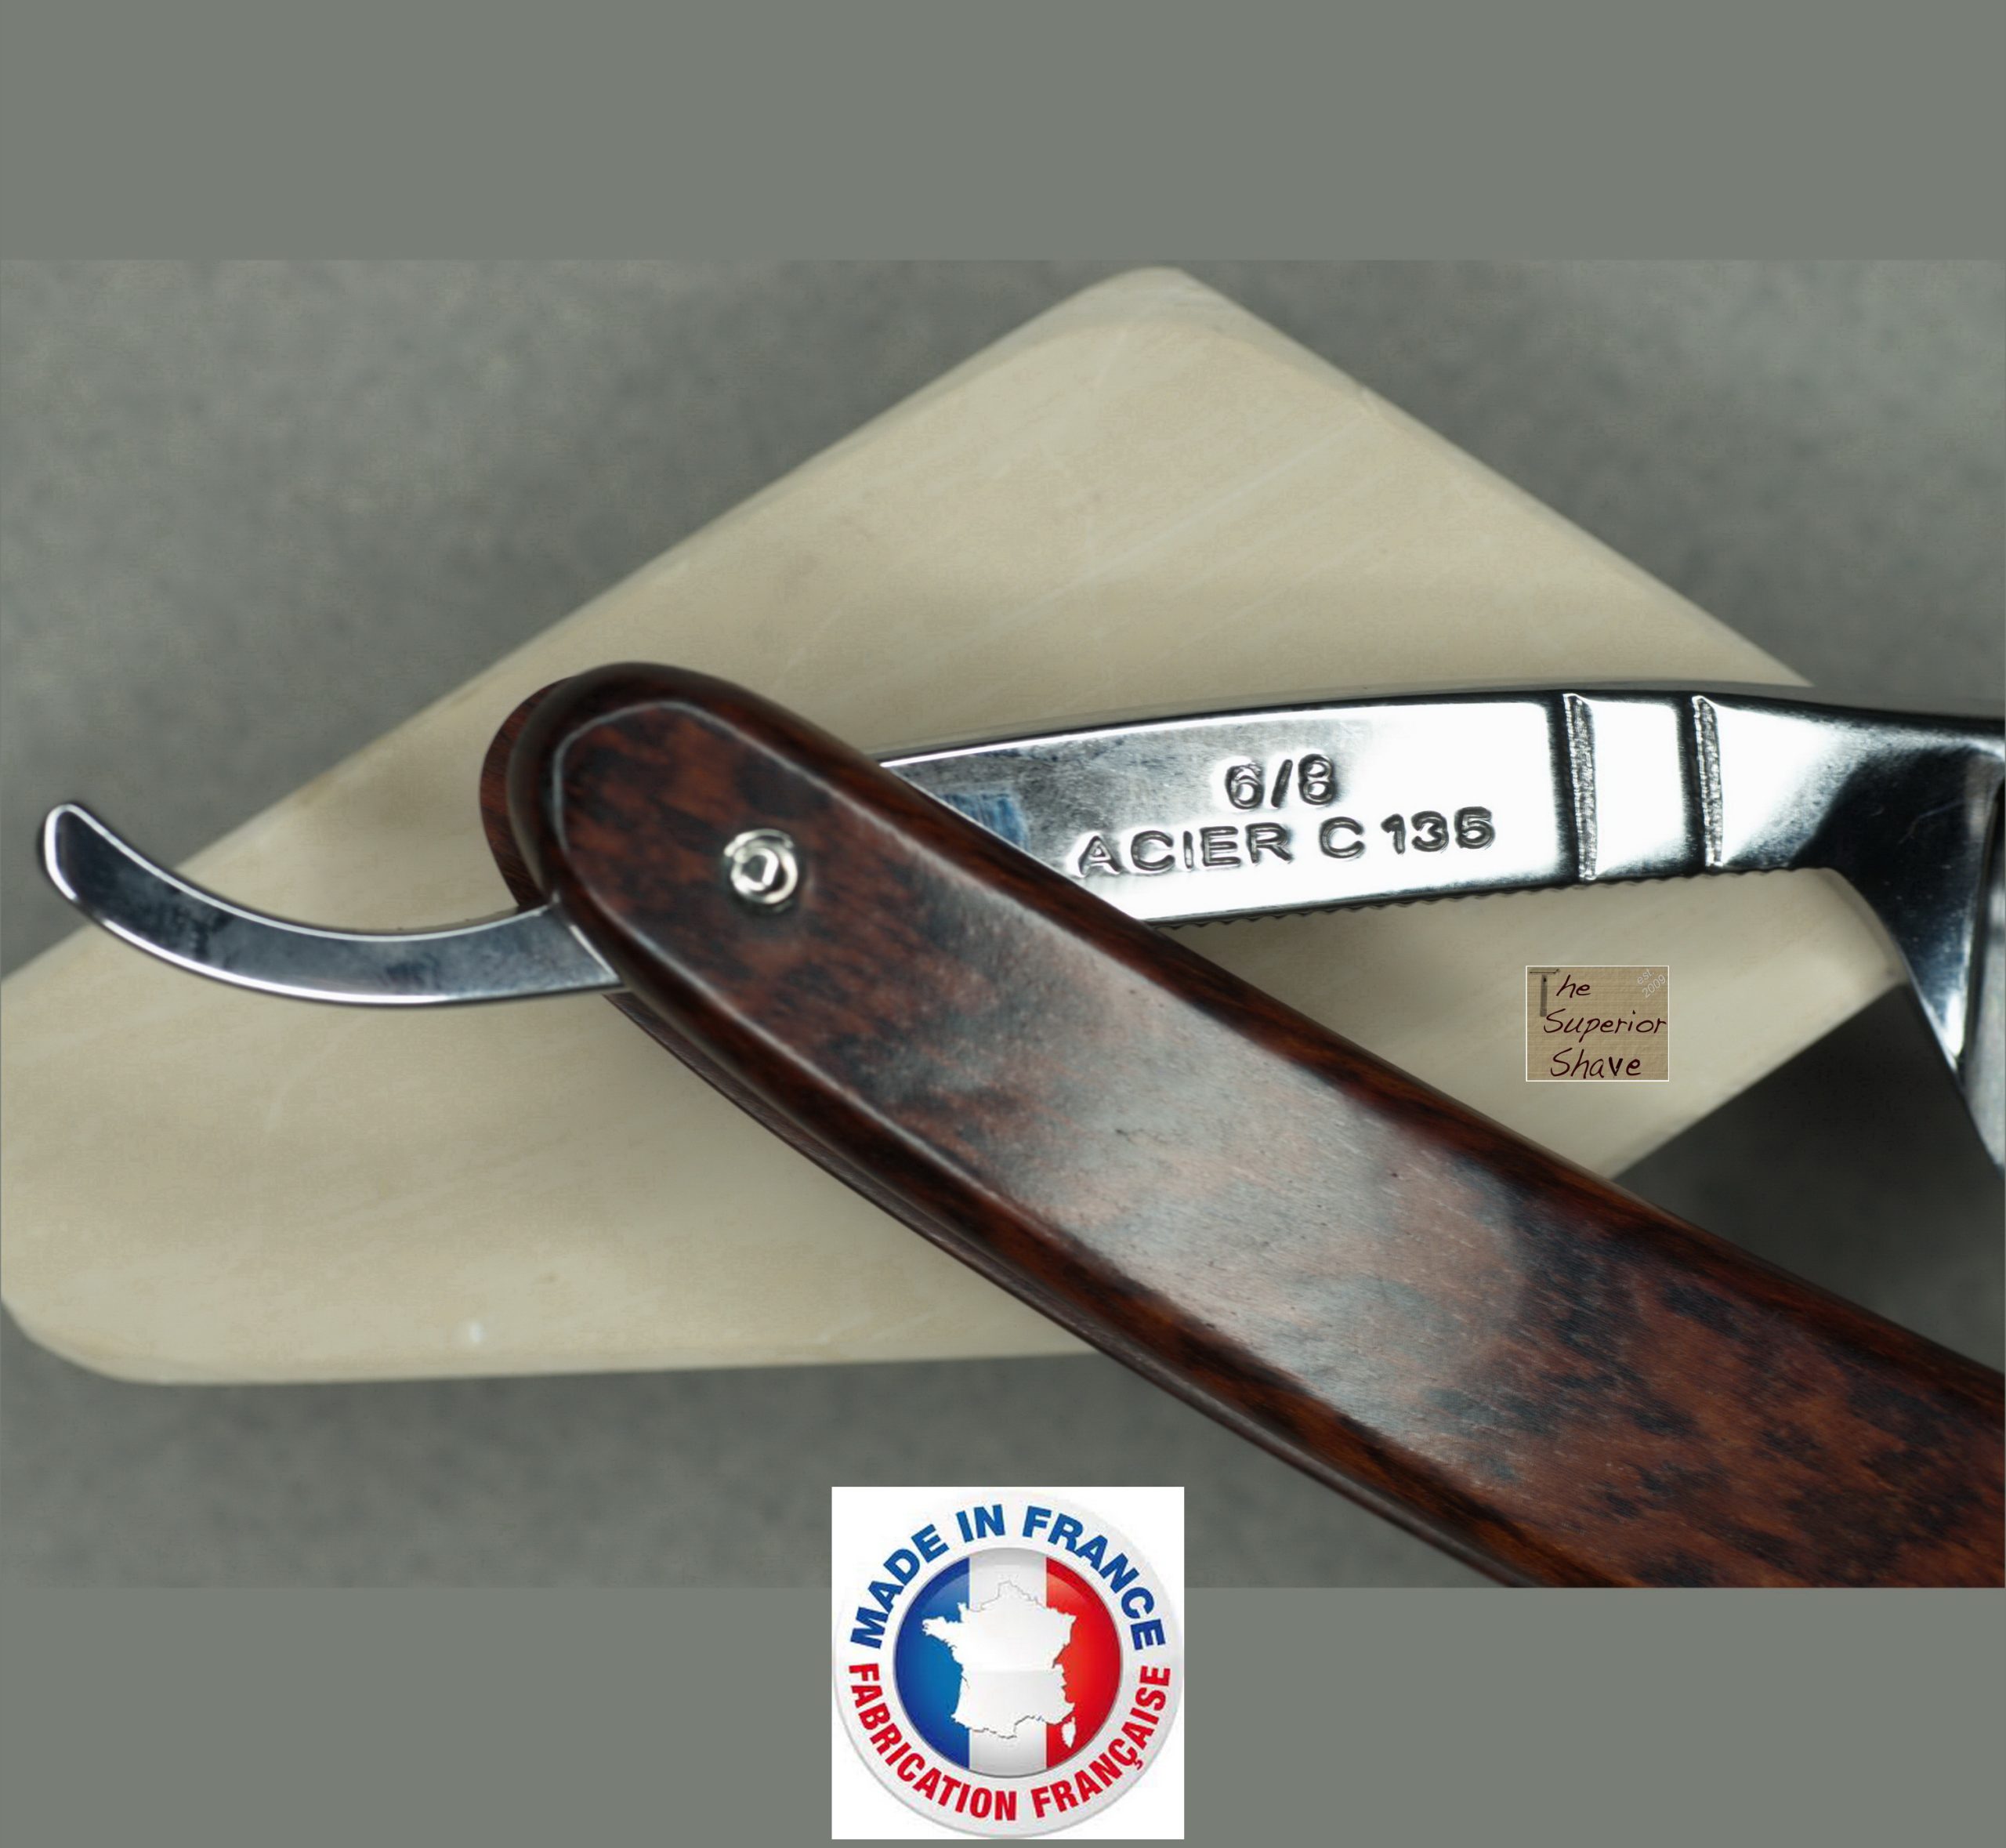 Thiers Issard 275 Le | 6/8 Hollow | – in Made Round Grelot French Handle | Snakewood Straight | Shave | Superior | Ground Carbon France The Steel Point Size Full Razor